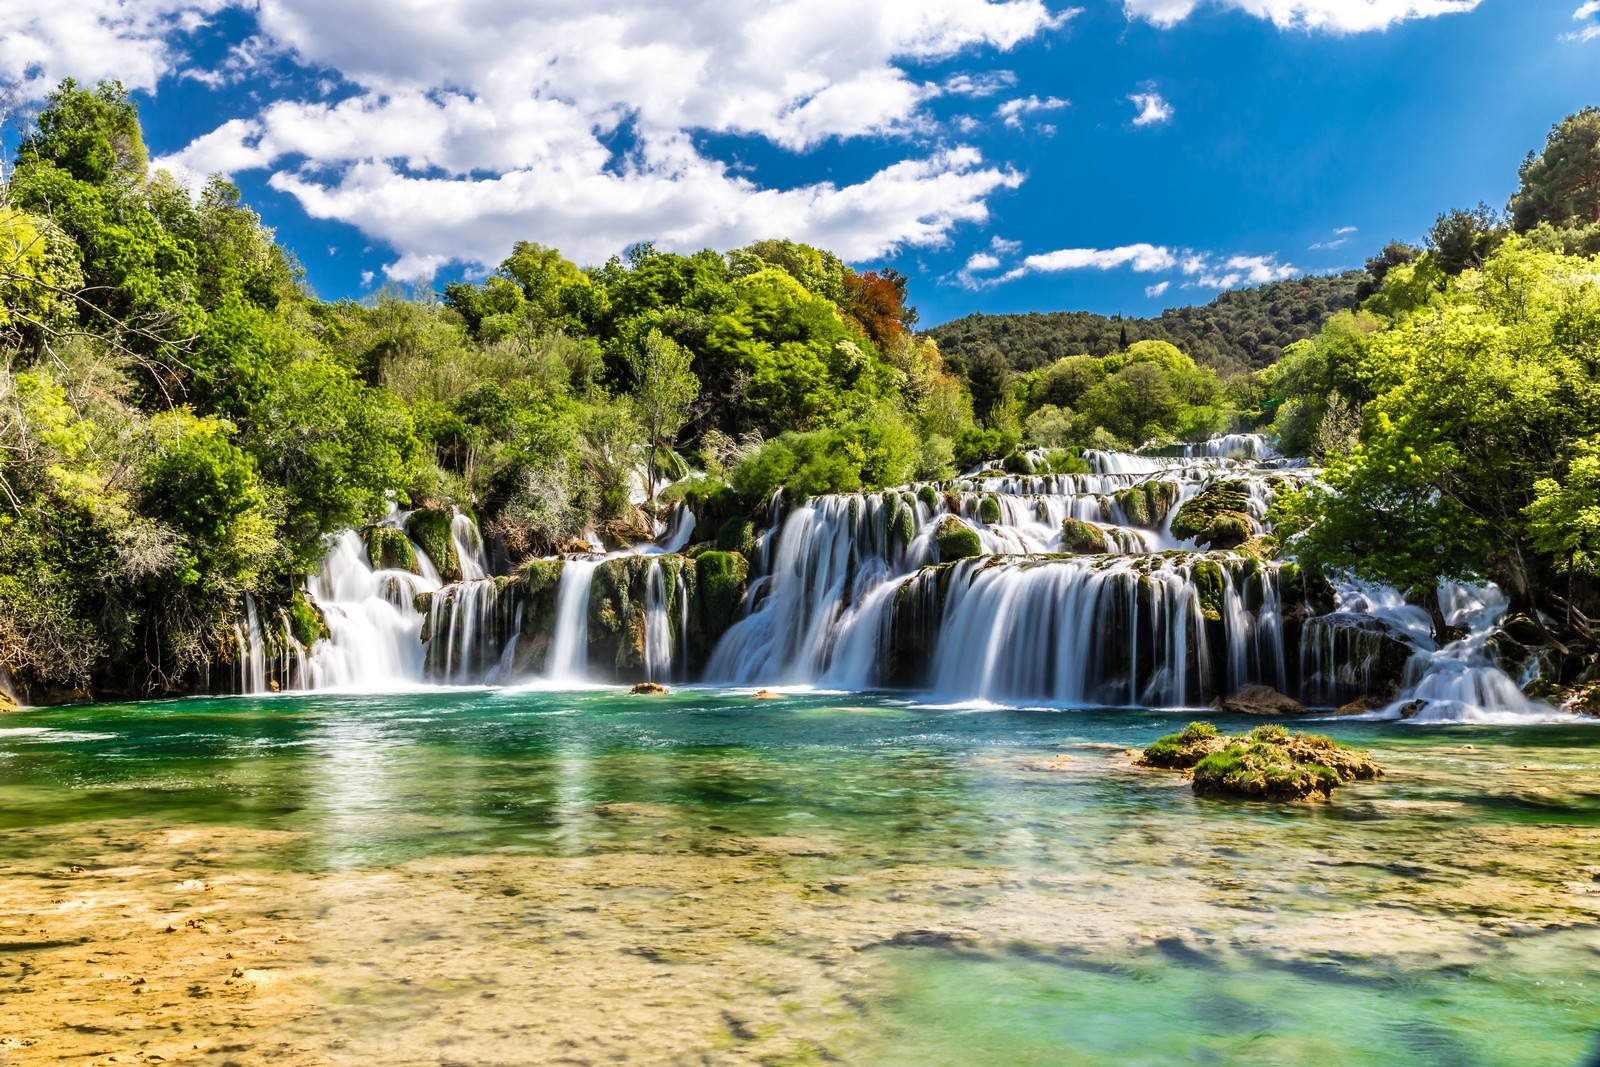 What to see in Croatia